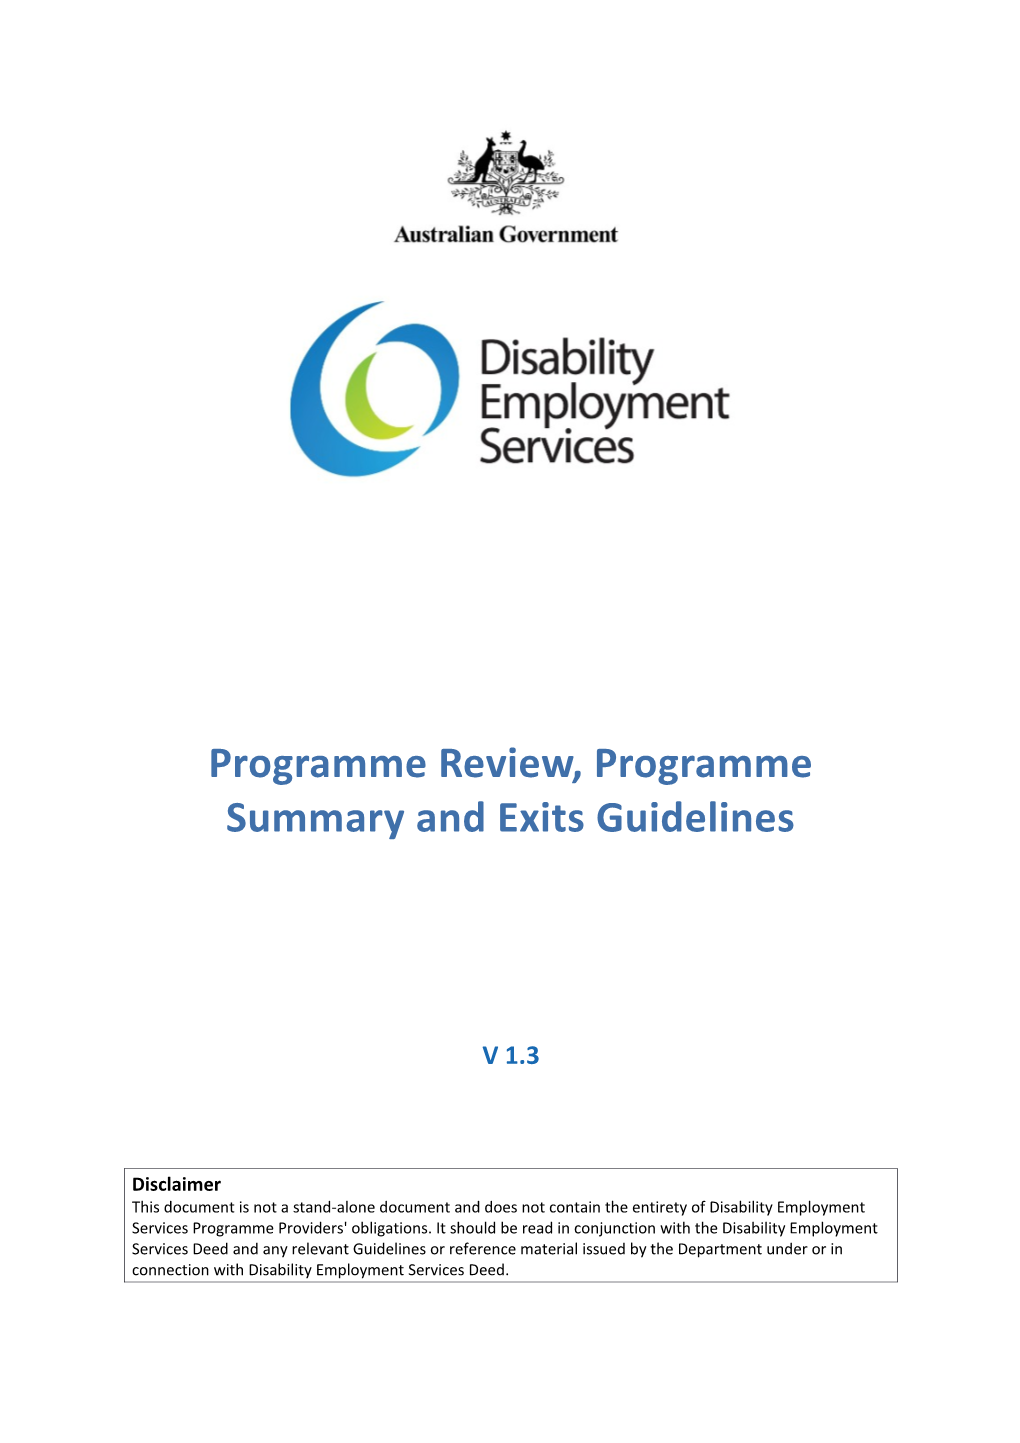 Programme Review, Programme Summary and Exits Guidelines